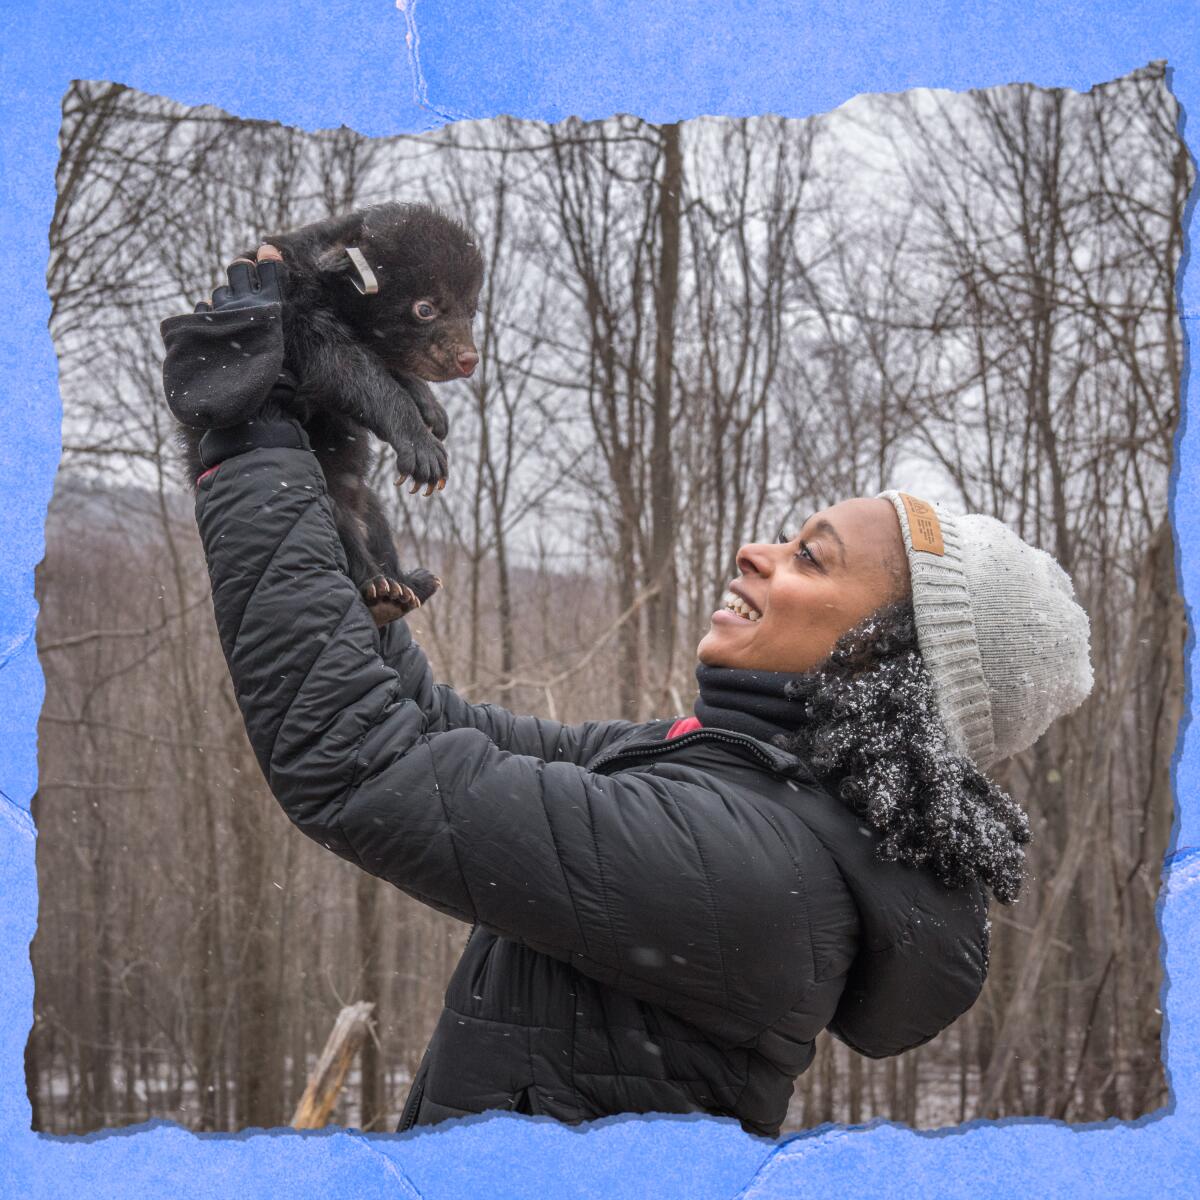 A smiling woman in a knit cap and a coat holds a baby bear.